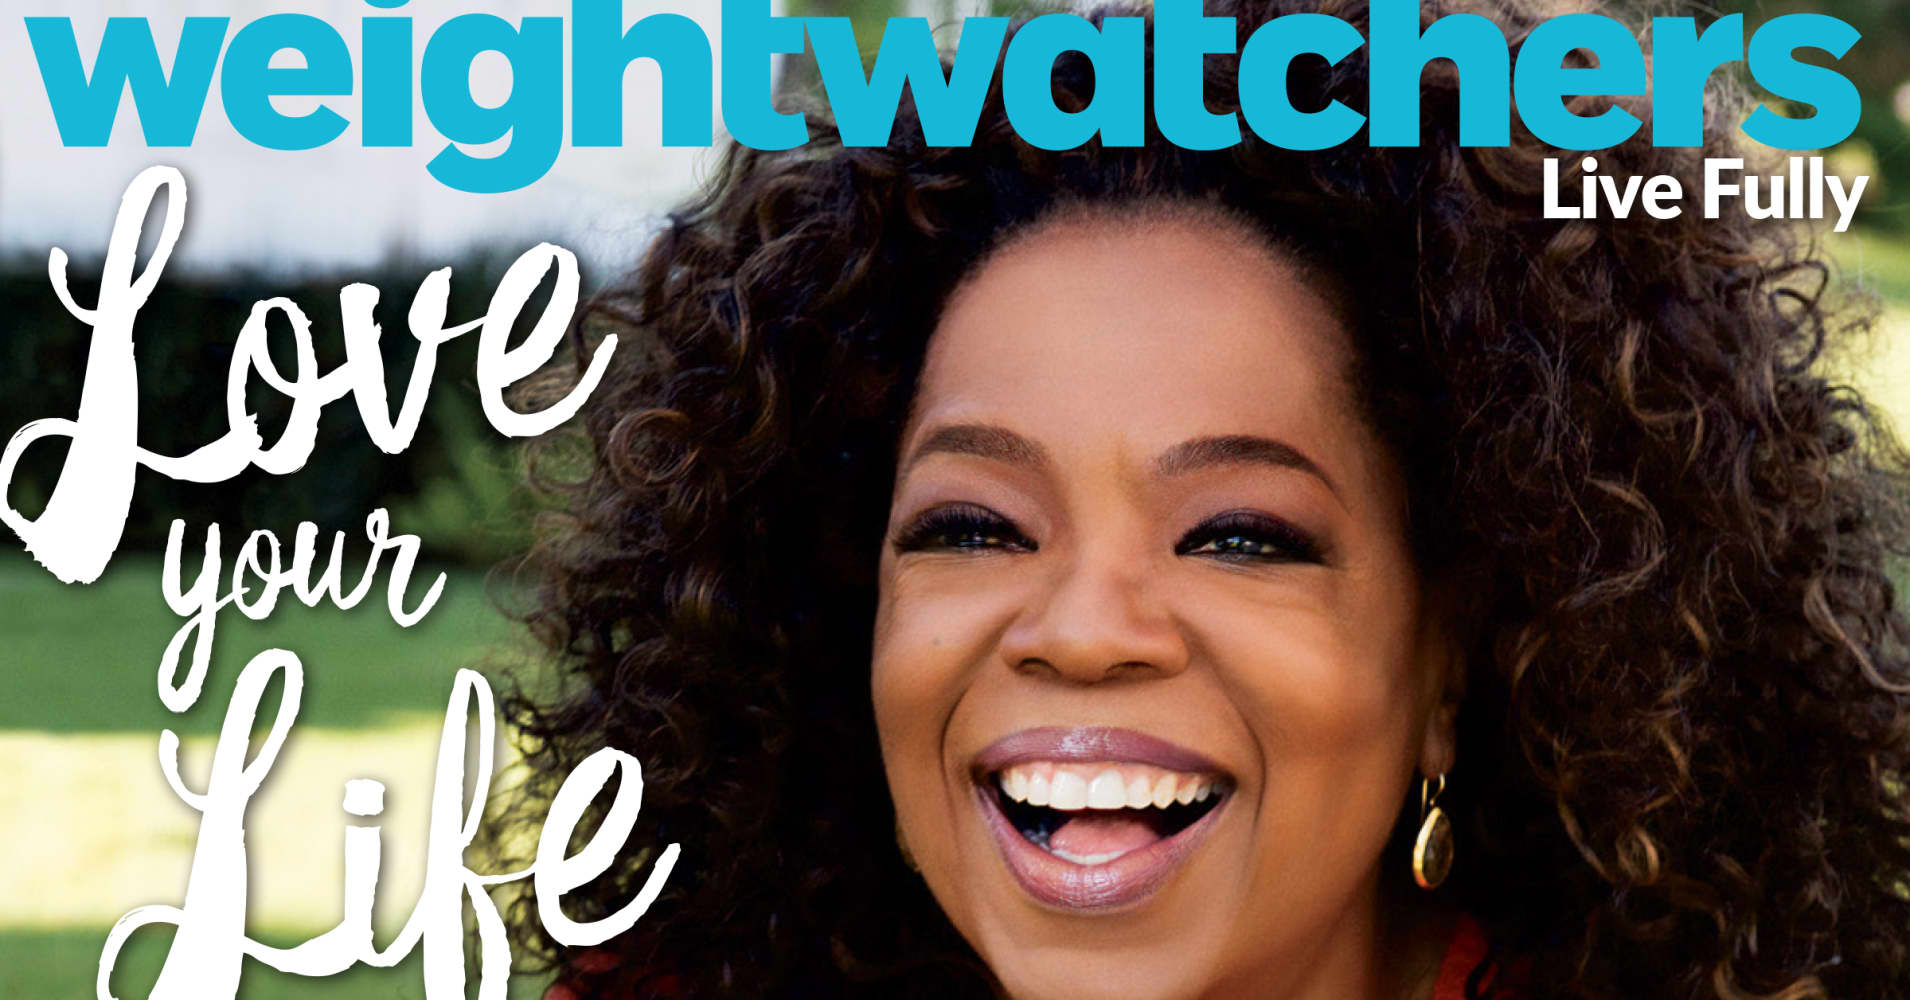 Weight Watchers calls on Oprah to help sell wellness after name change to WW confused people